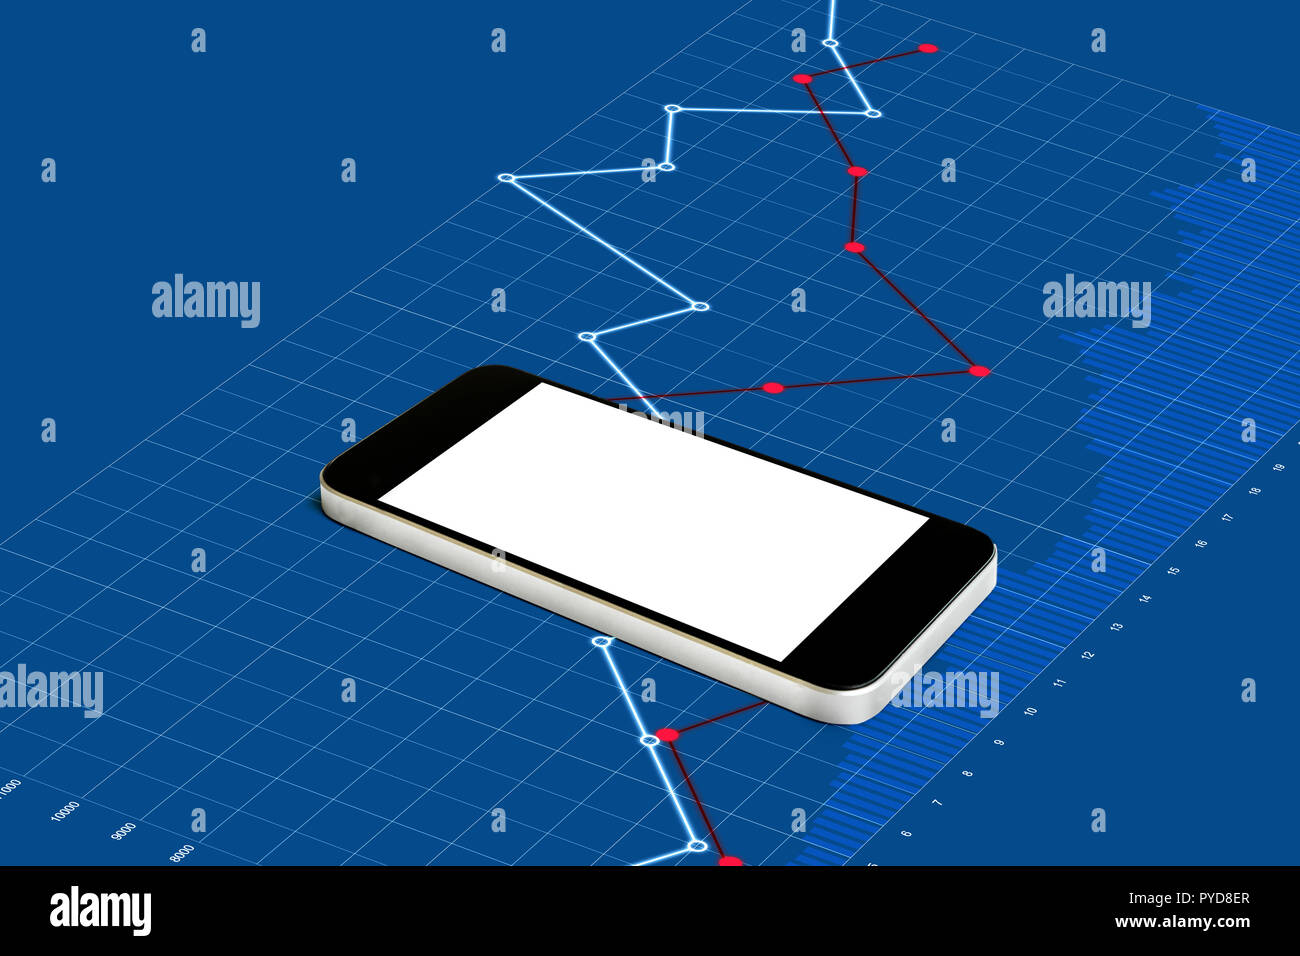 Mobile smart phone, empty white screen on blue raising graph background Stock Photo